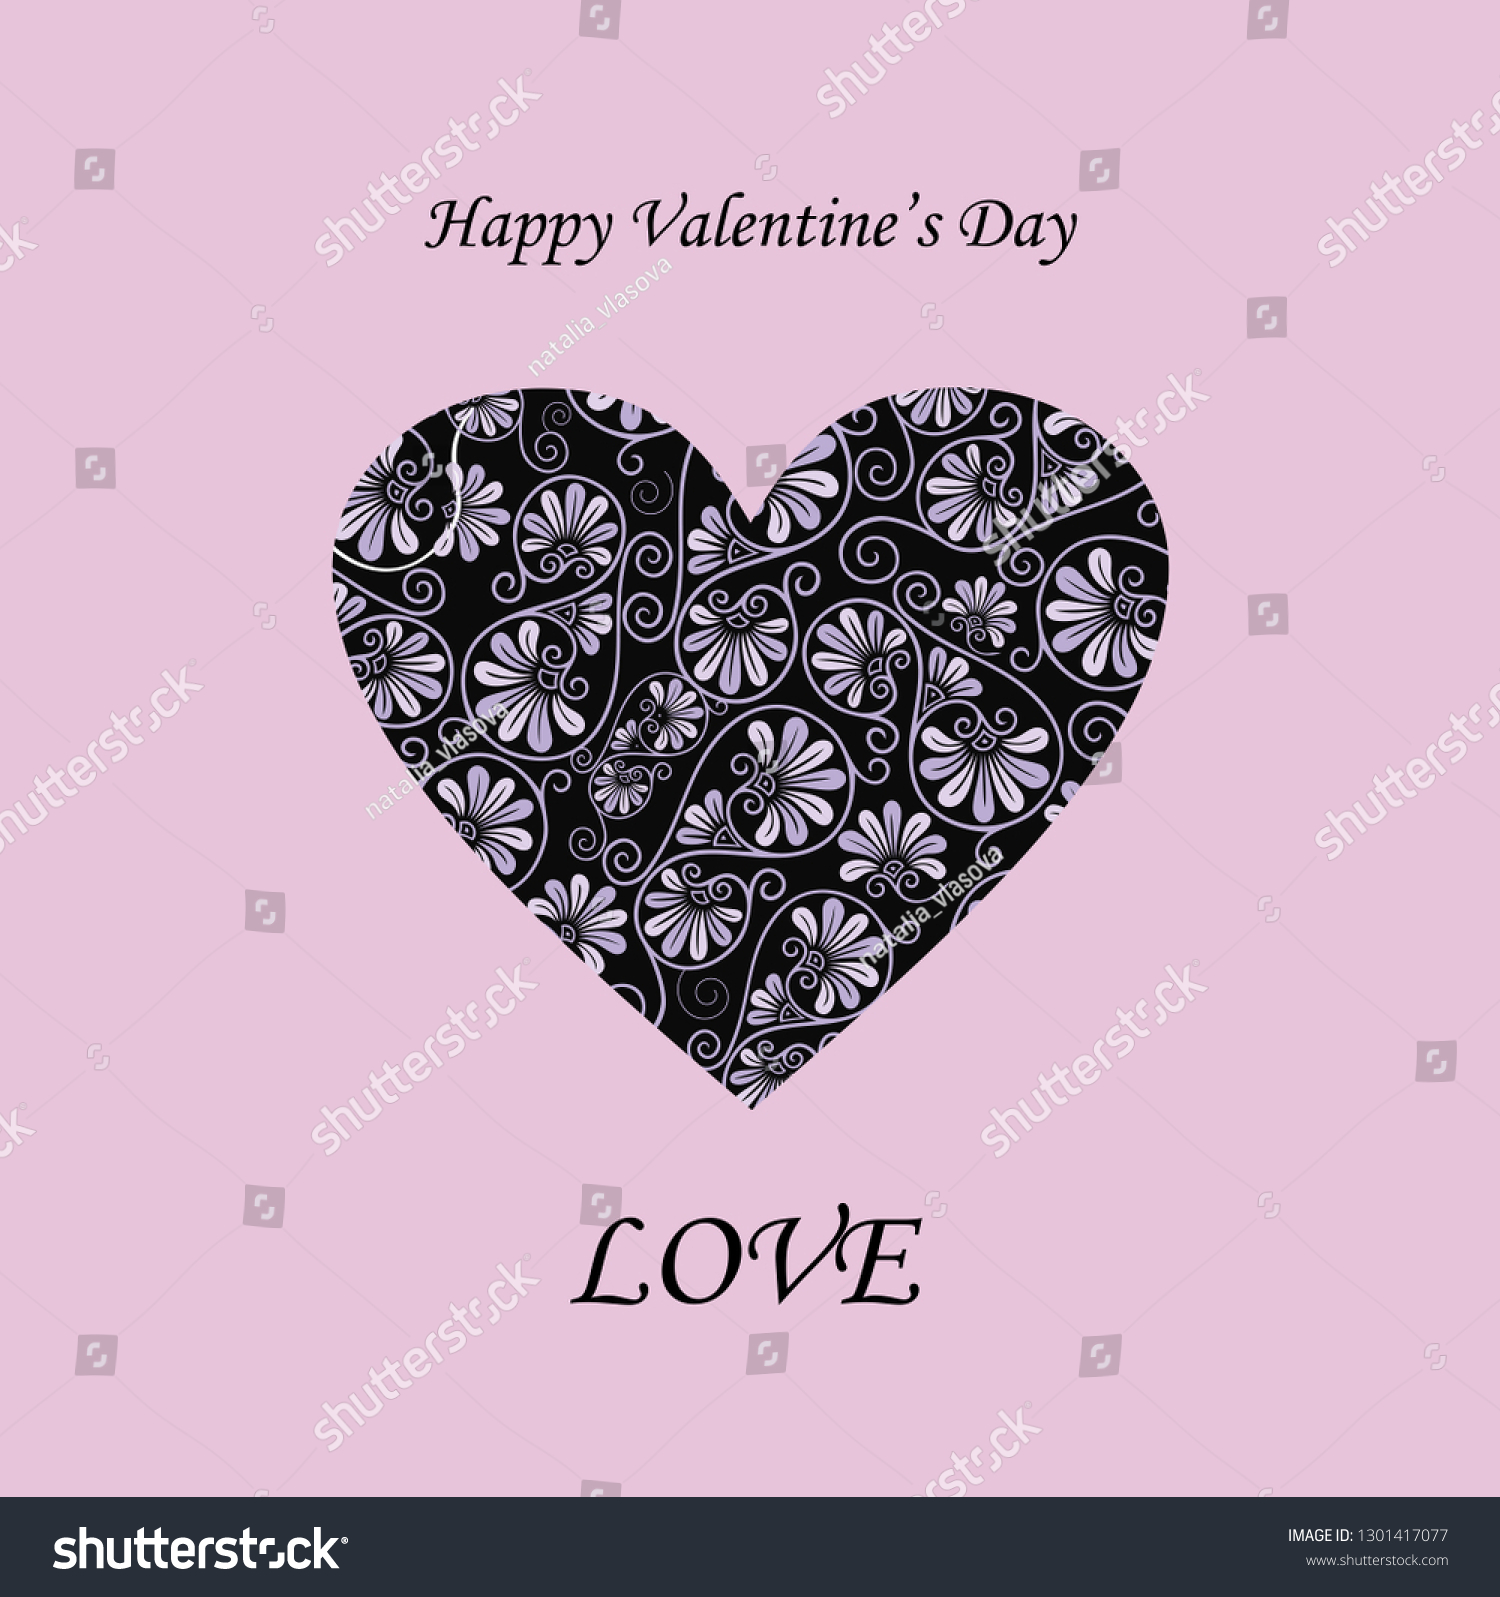 Happy Valentine's day card background with heart. Vector illustration for greeting postcard, romantic wedding invitation. Heart shape vector. Love illustration.  #1301417077